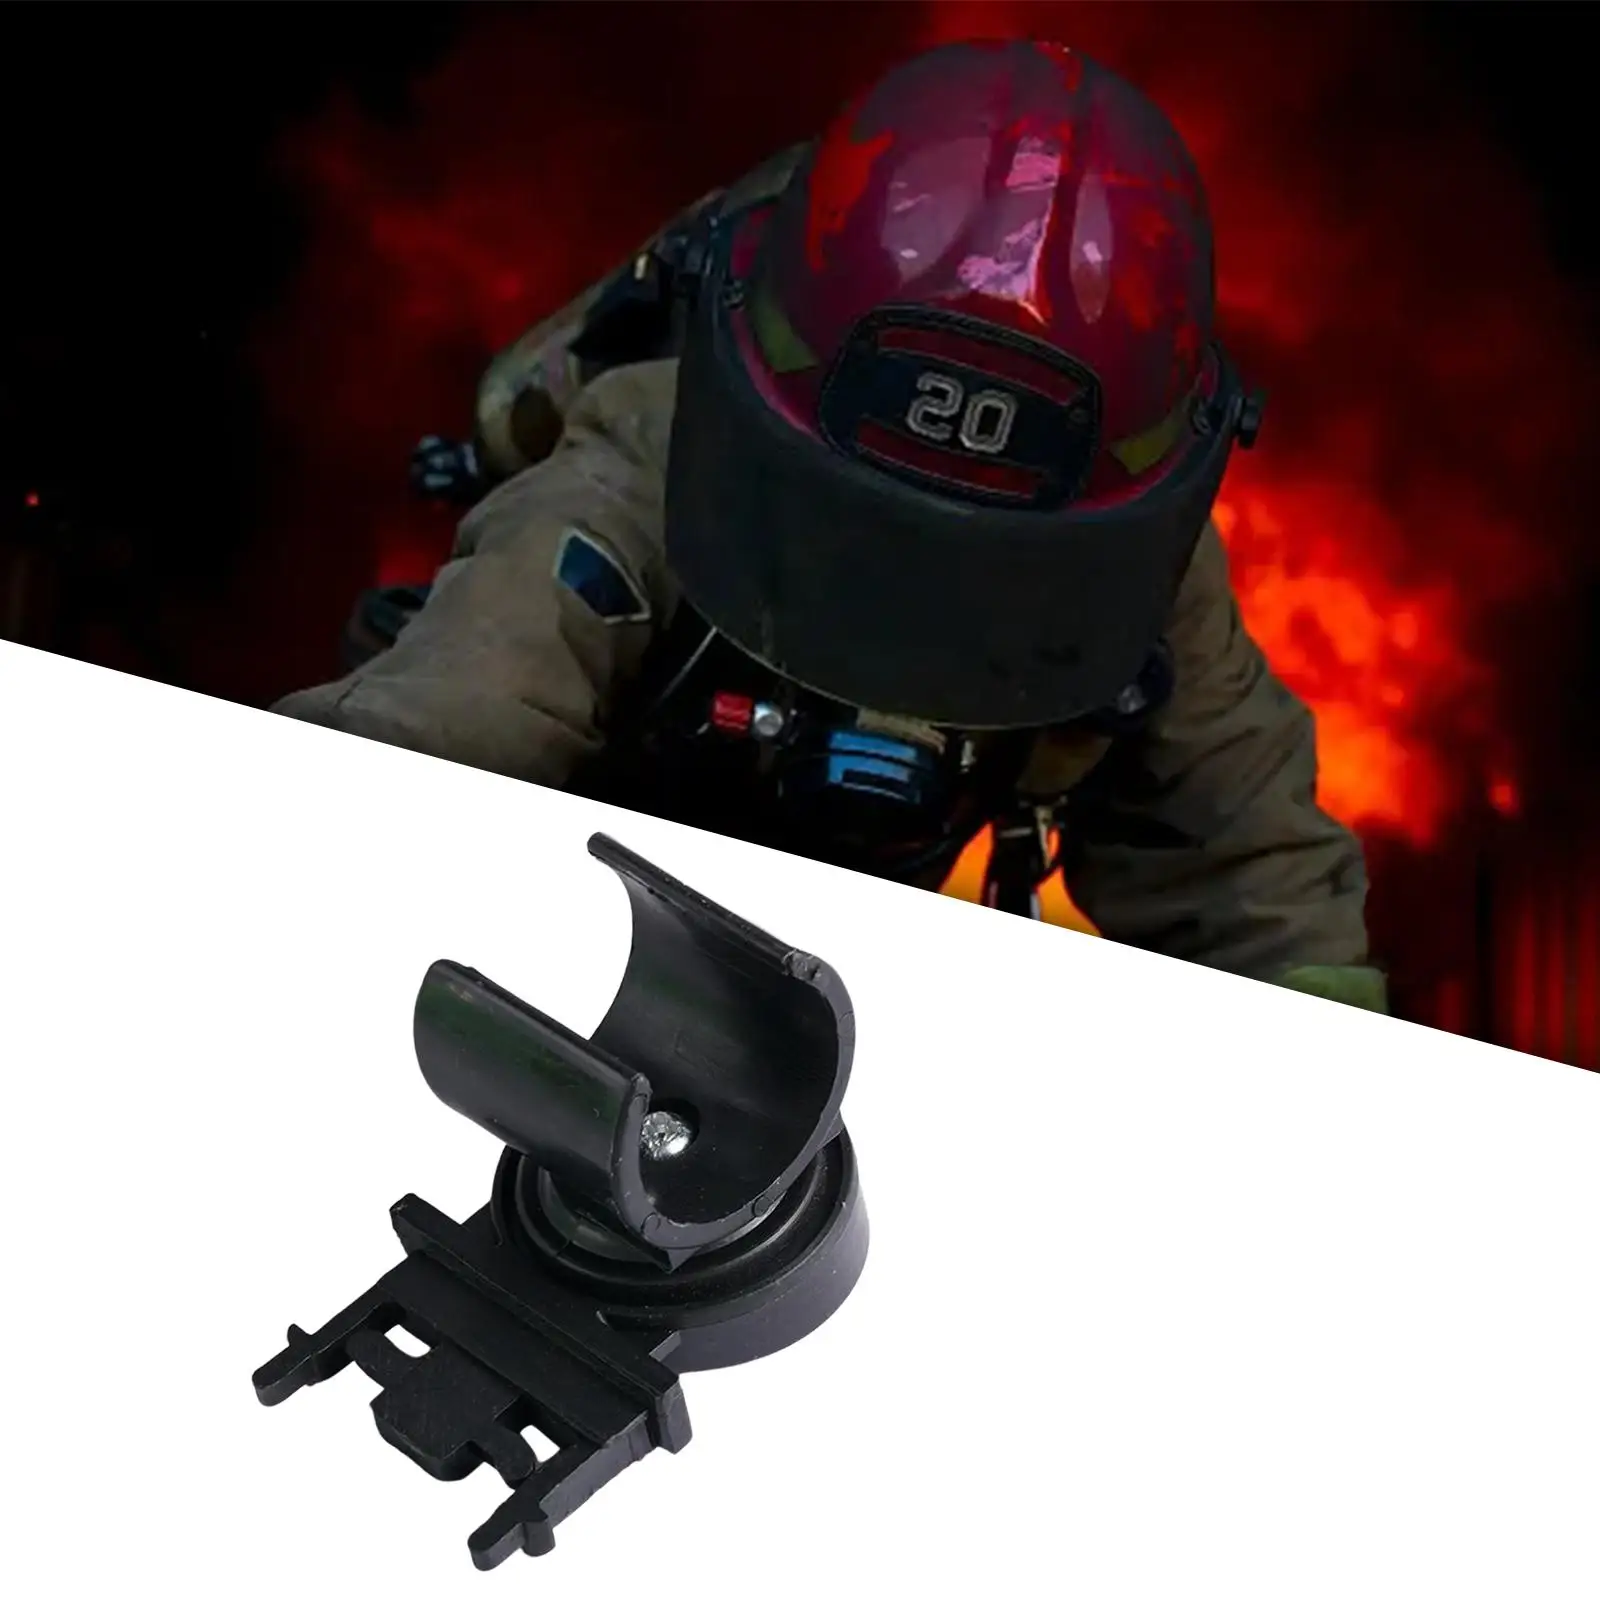 Hard Hats Flashlight Holder Easy to Use Mount Bracket Diameter 25mm F2 Helmet Torch Clamp Adaptor for Shooting Outdoor Accessory